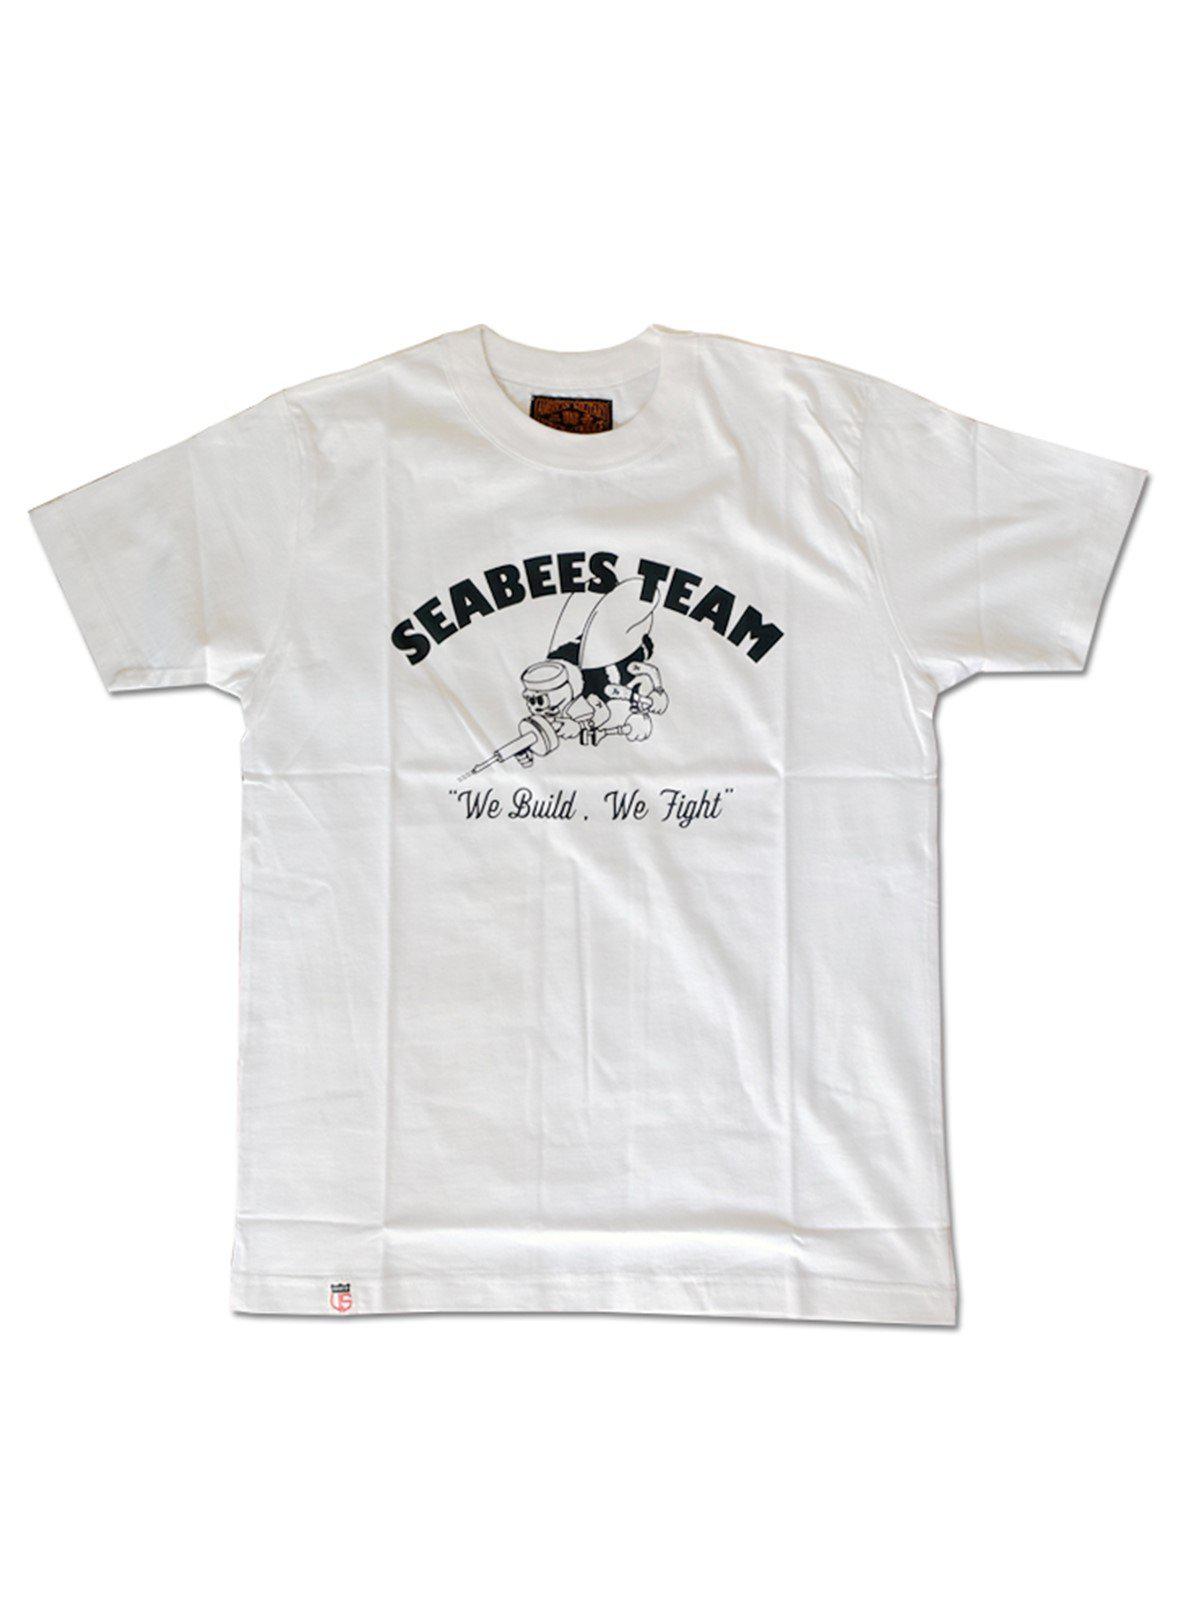 US Comp4ny Seabees Tees White - MORE by Morello Indonesia